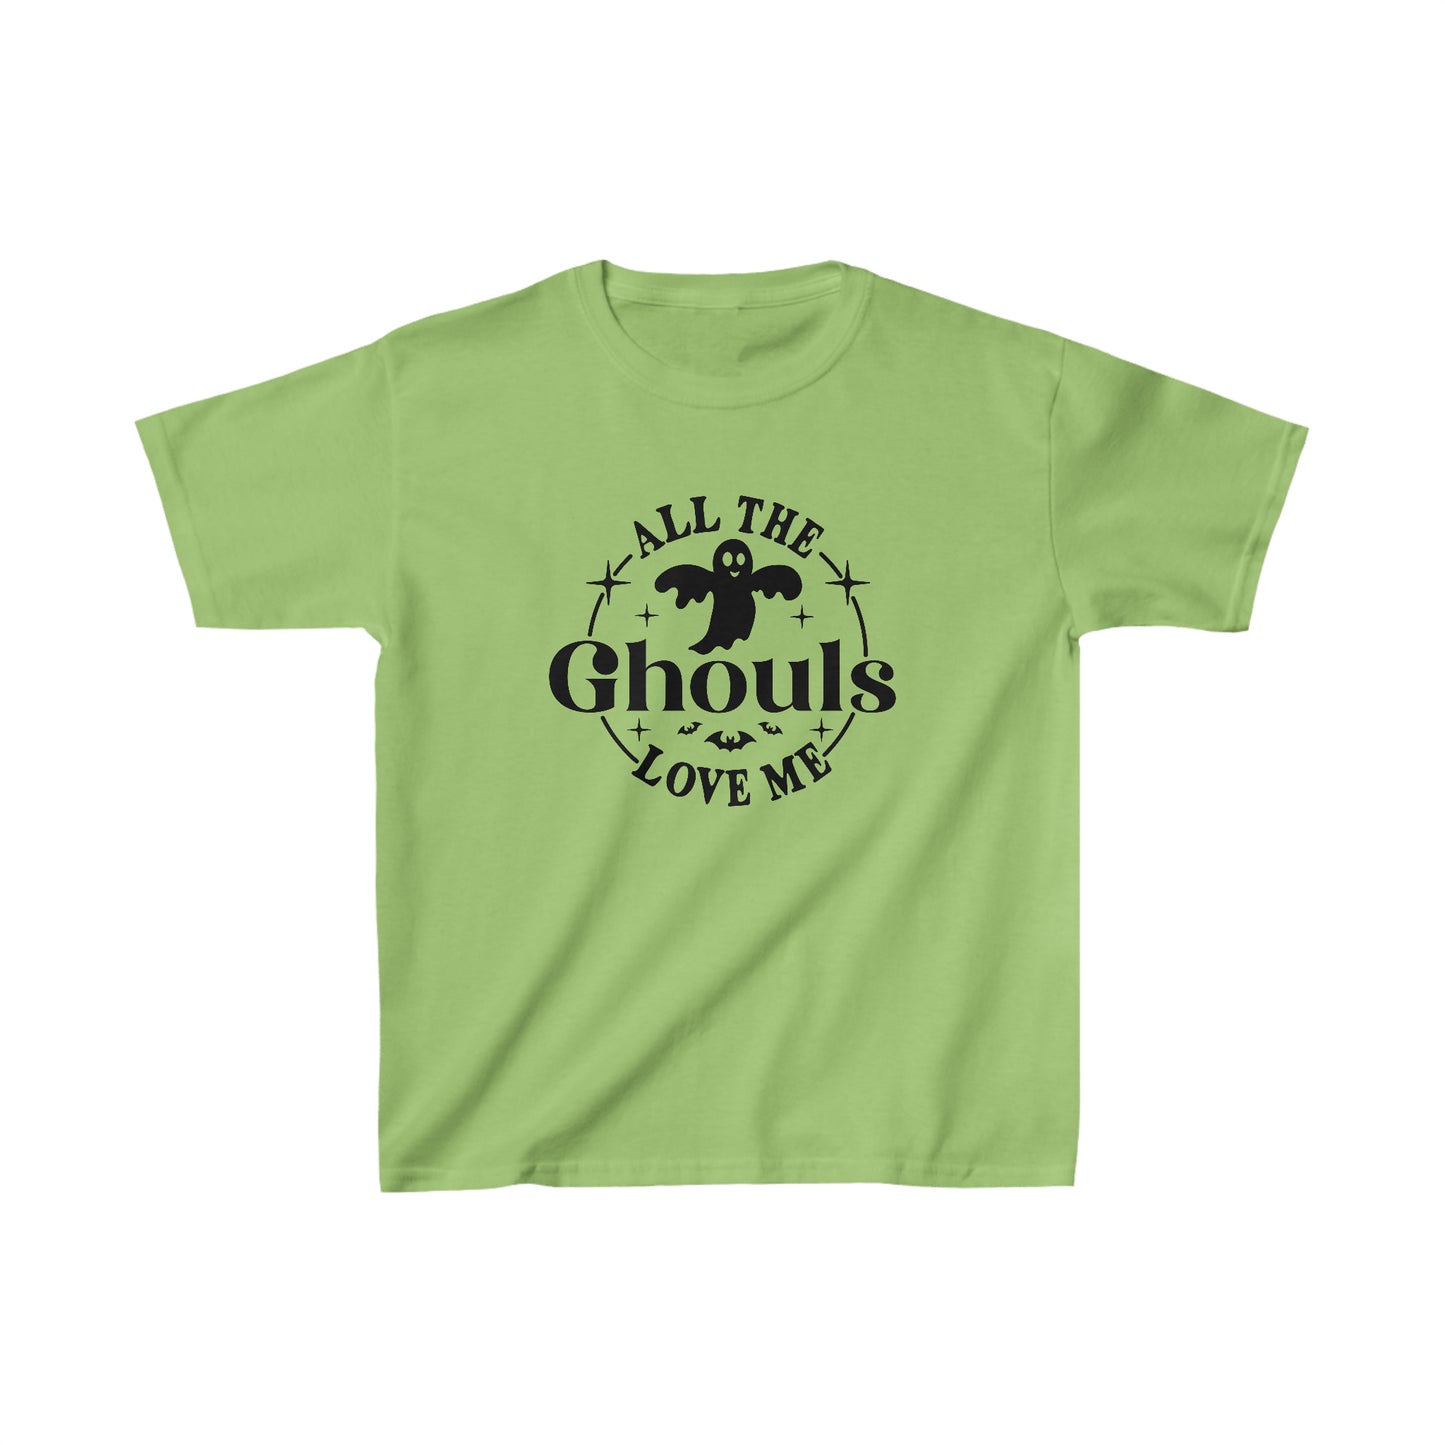 All the Ghouls Love Me Kid's Heavy Cotton Tee